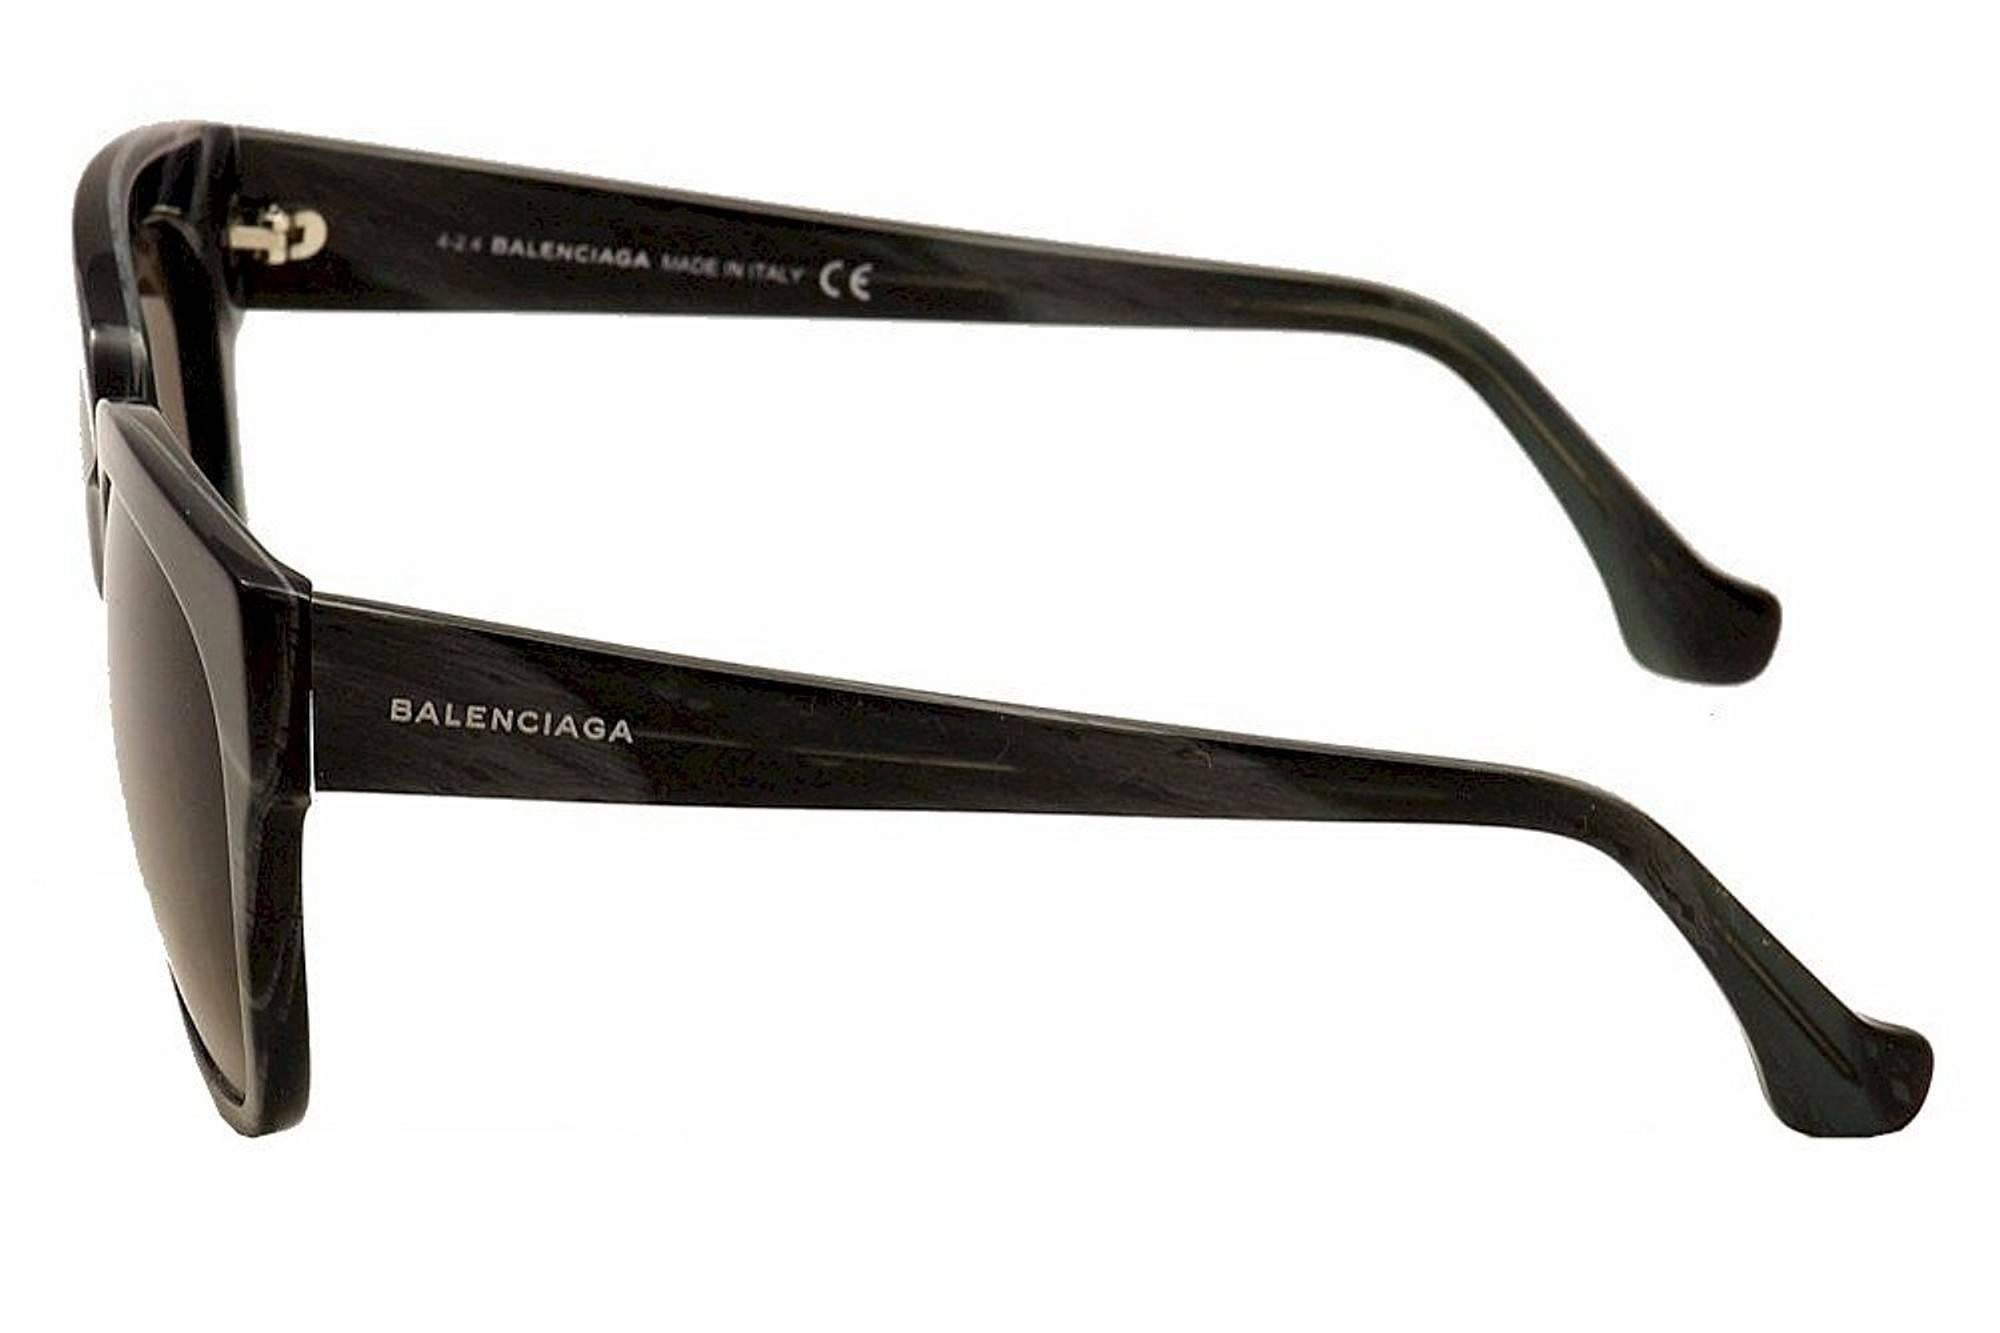 Balenciaga BA0015-63K-59 Black Horn / Gradient Roviex Sunglasses

Frame : Acetate
Brand new with original case and cleaning cloth.
Made in Italy